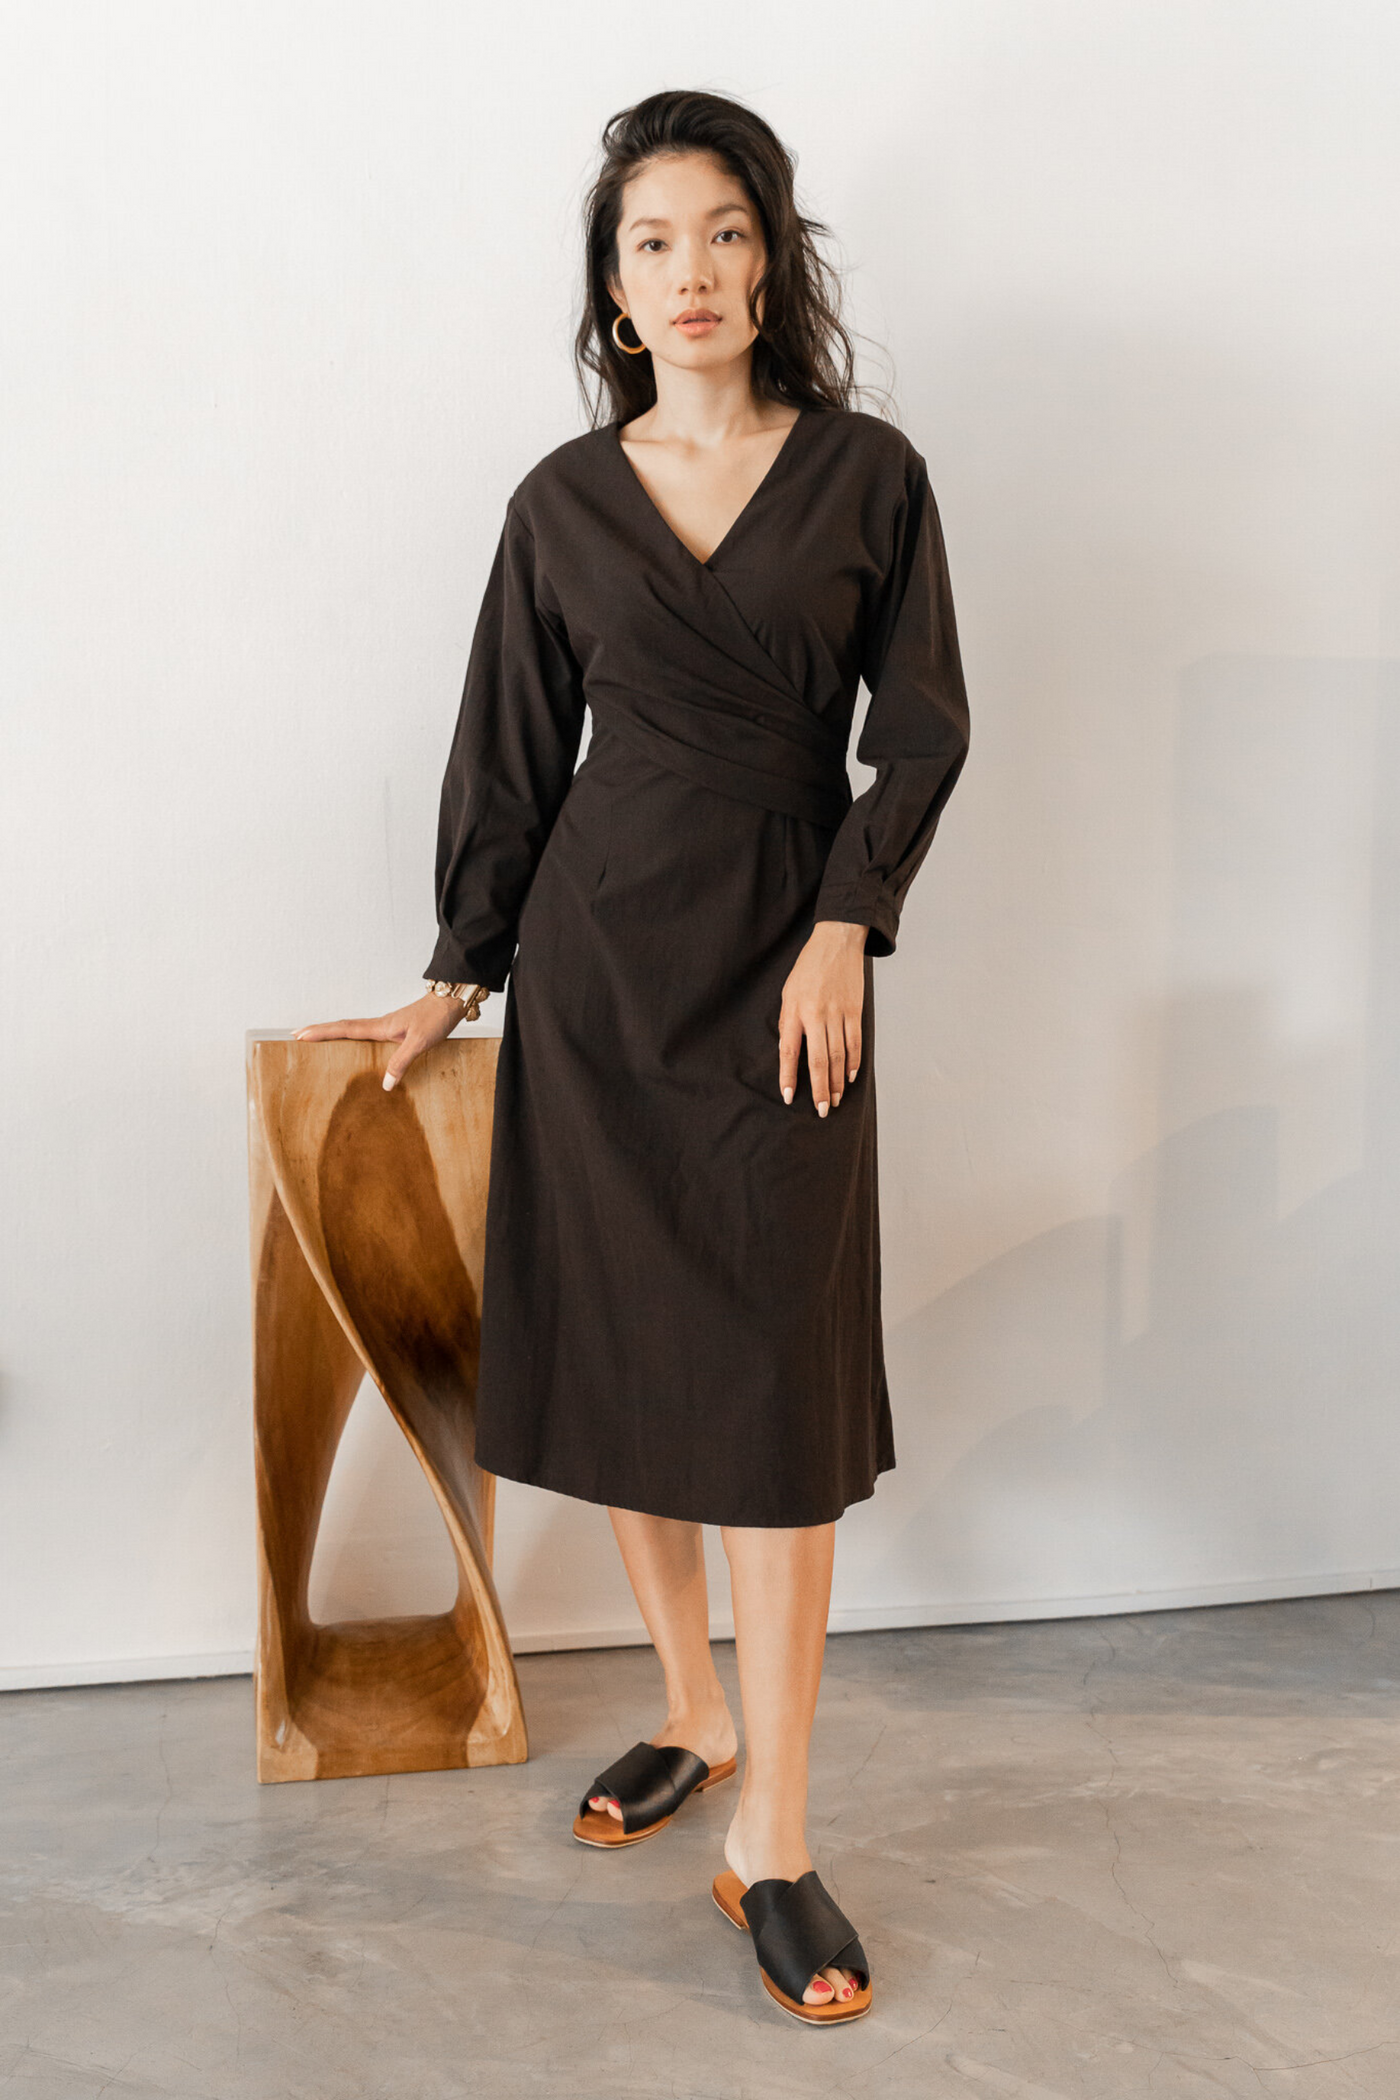 Su By Hand Vanda Dress in Black, available on ZERRIN with free Singapore shipping